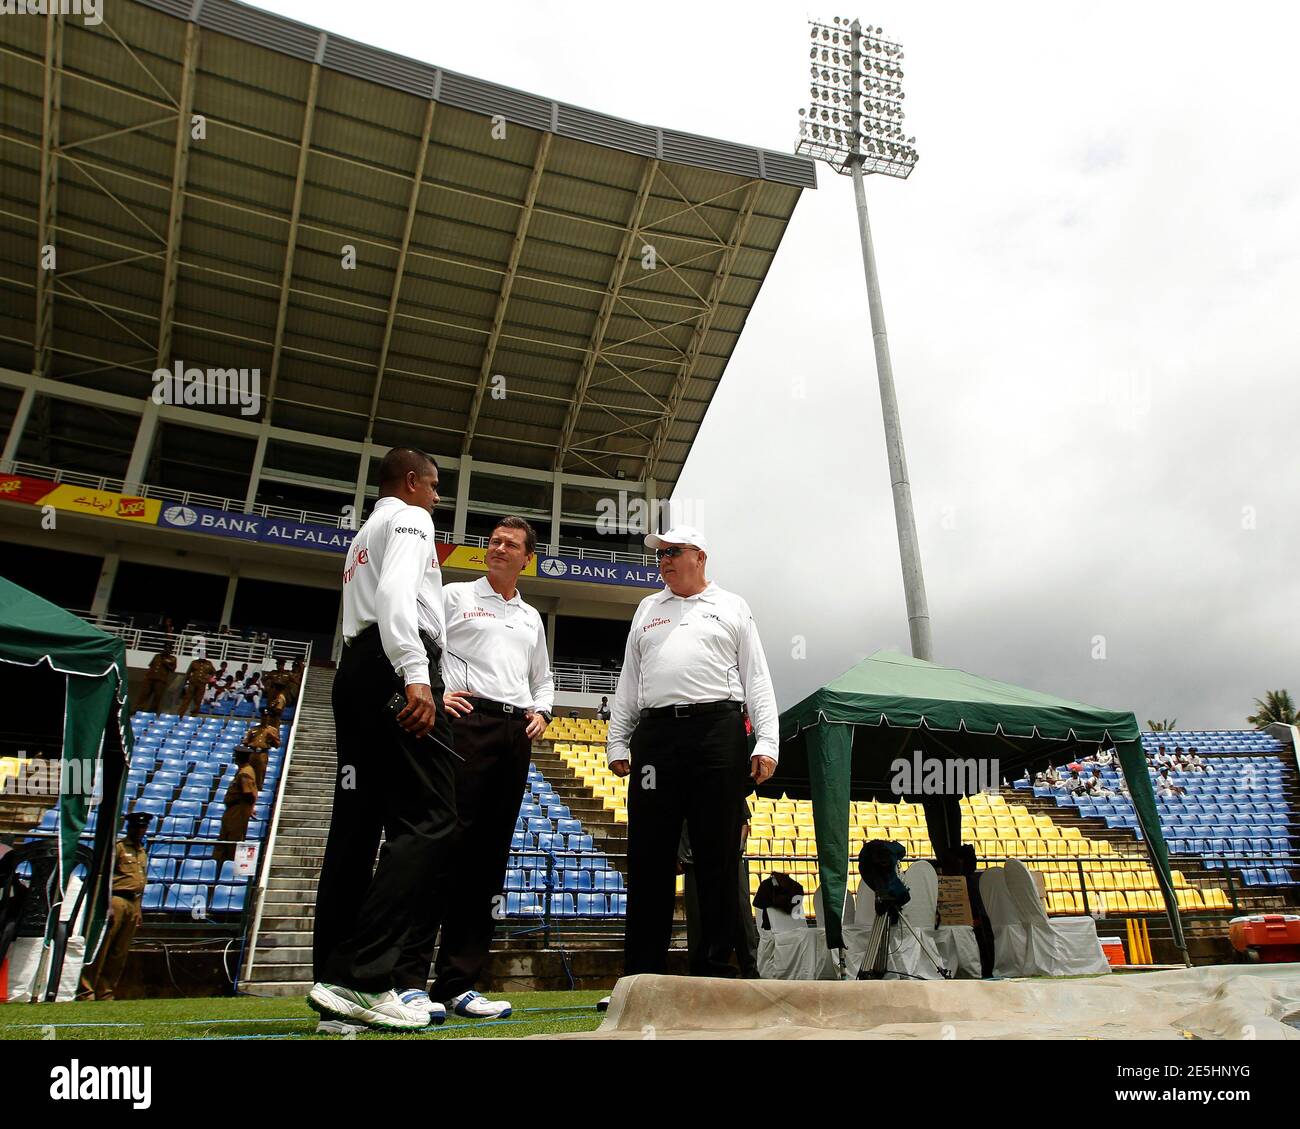 Umpires Simon Taufel (C) and Stephen Davis (R) discusses about the weather as the start of the second day of the third and final test match between Sri Lanka and Pakistan is delayed due to rain in Pallekele July 9, 2012. REUTERS/Dinuka Liyanawatte (SRI LANKA - Tags: SPORT CRICKET) Stock Photo